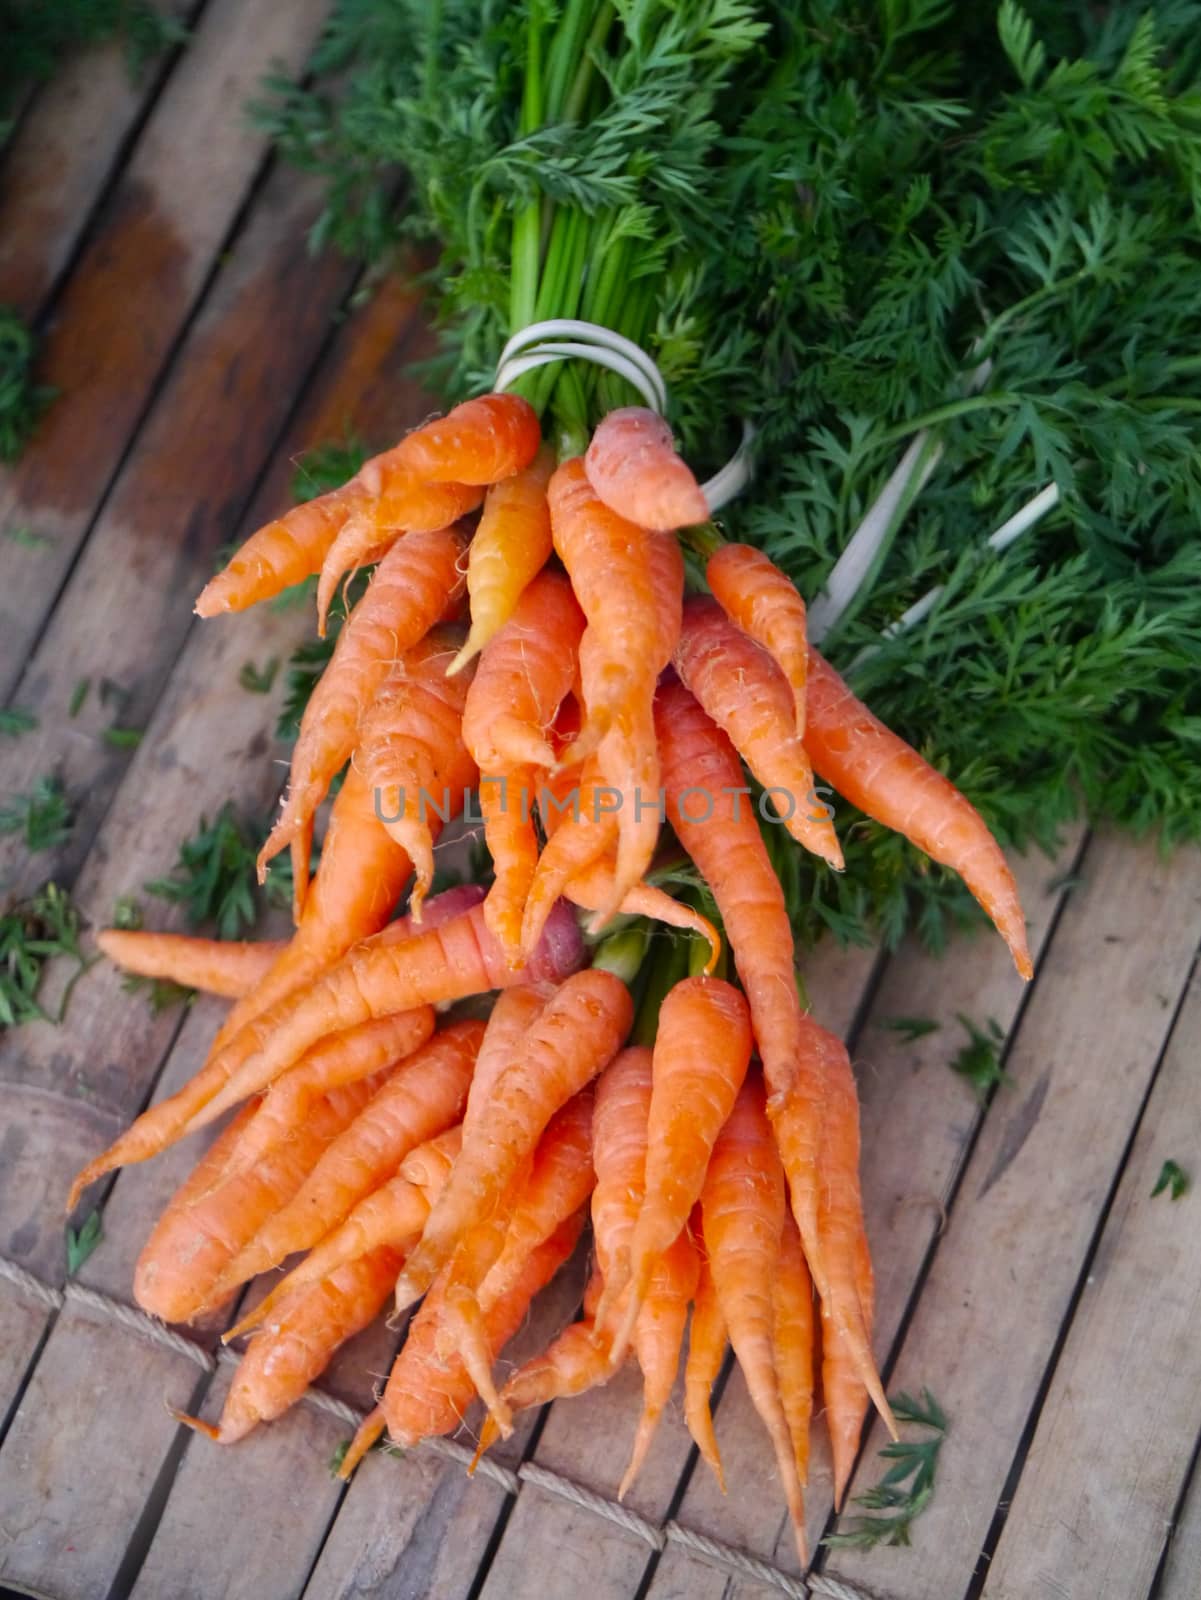 Bunch of fresh baby carrots by Noppharat_th